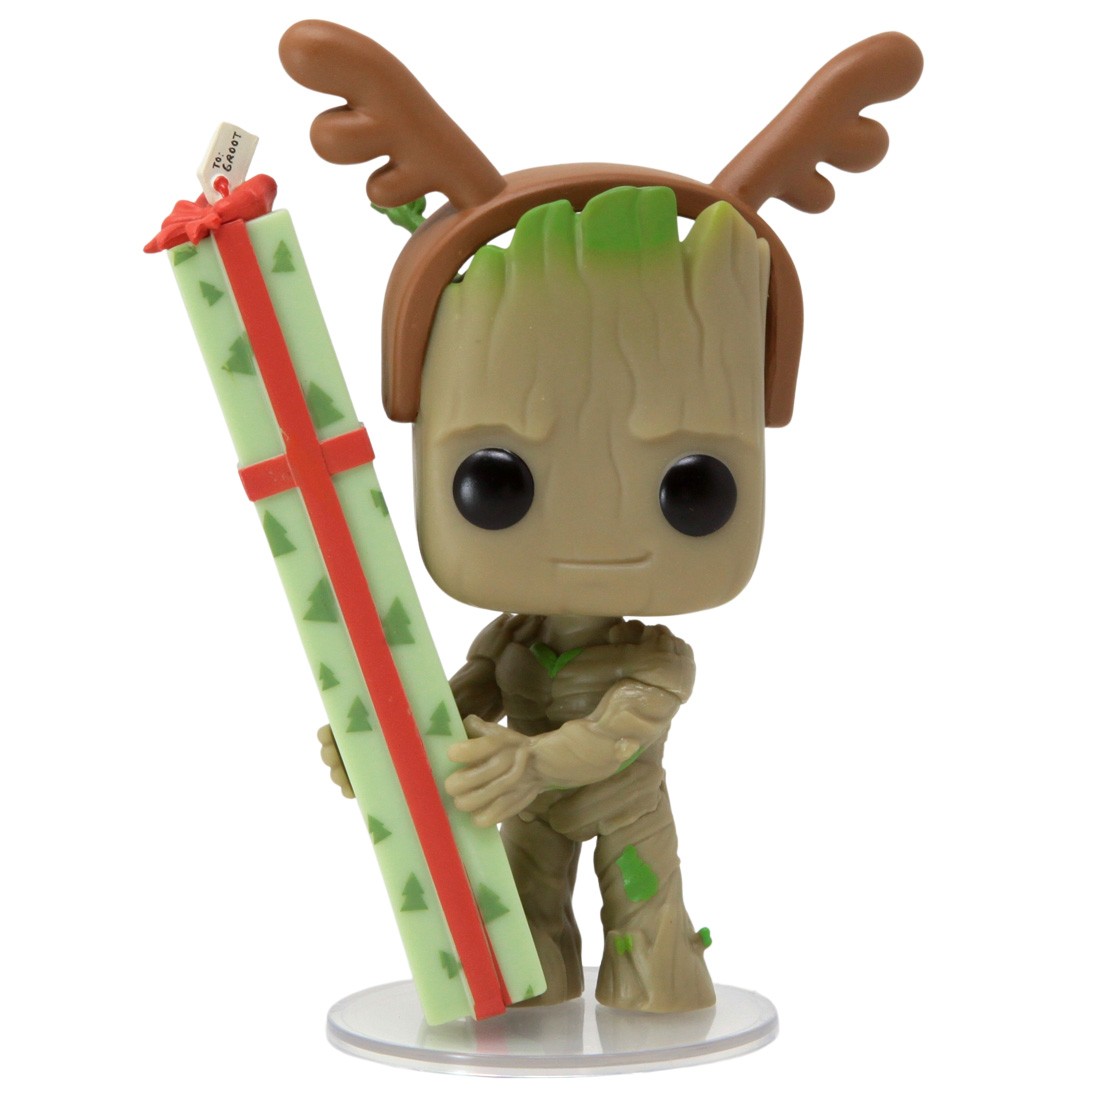 Funko POP Marvel Guardians Of The Galaxy Holiday Special - Groot (brown)